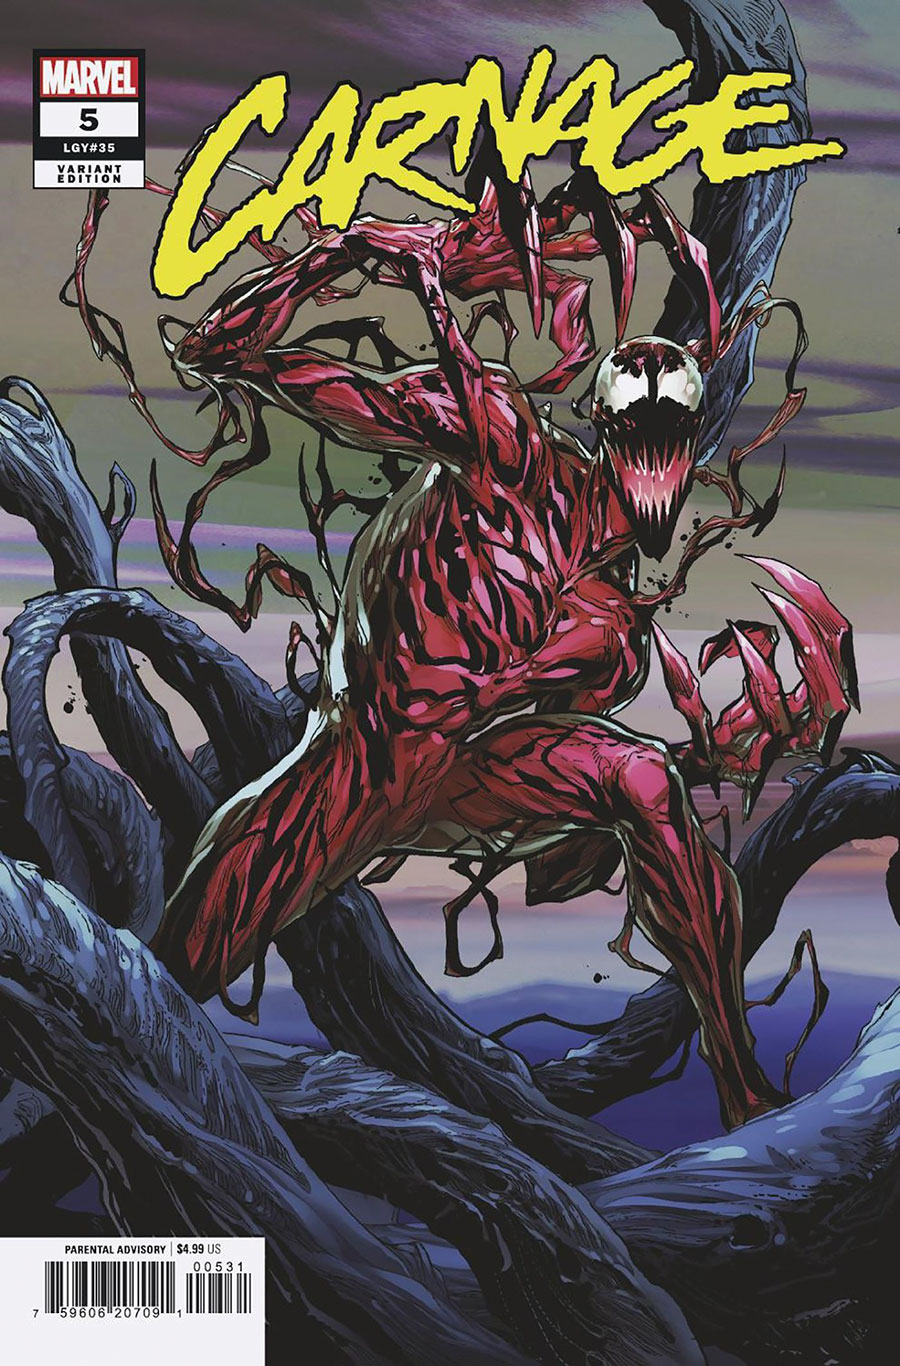 Carnage Vol 4 #5 Cover B Variant Ken Lashley Connecting Cover (Symbiosis Necrosis Part 2)